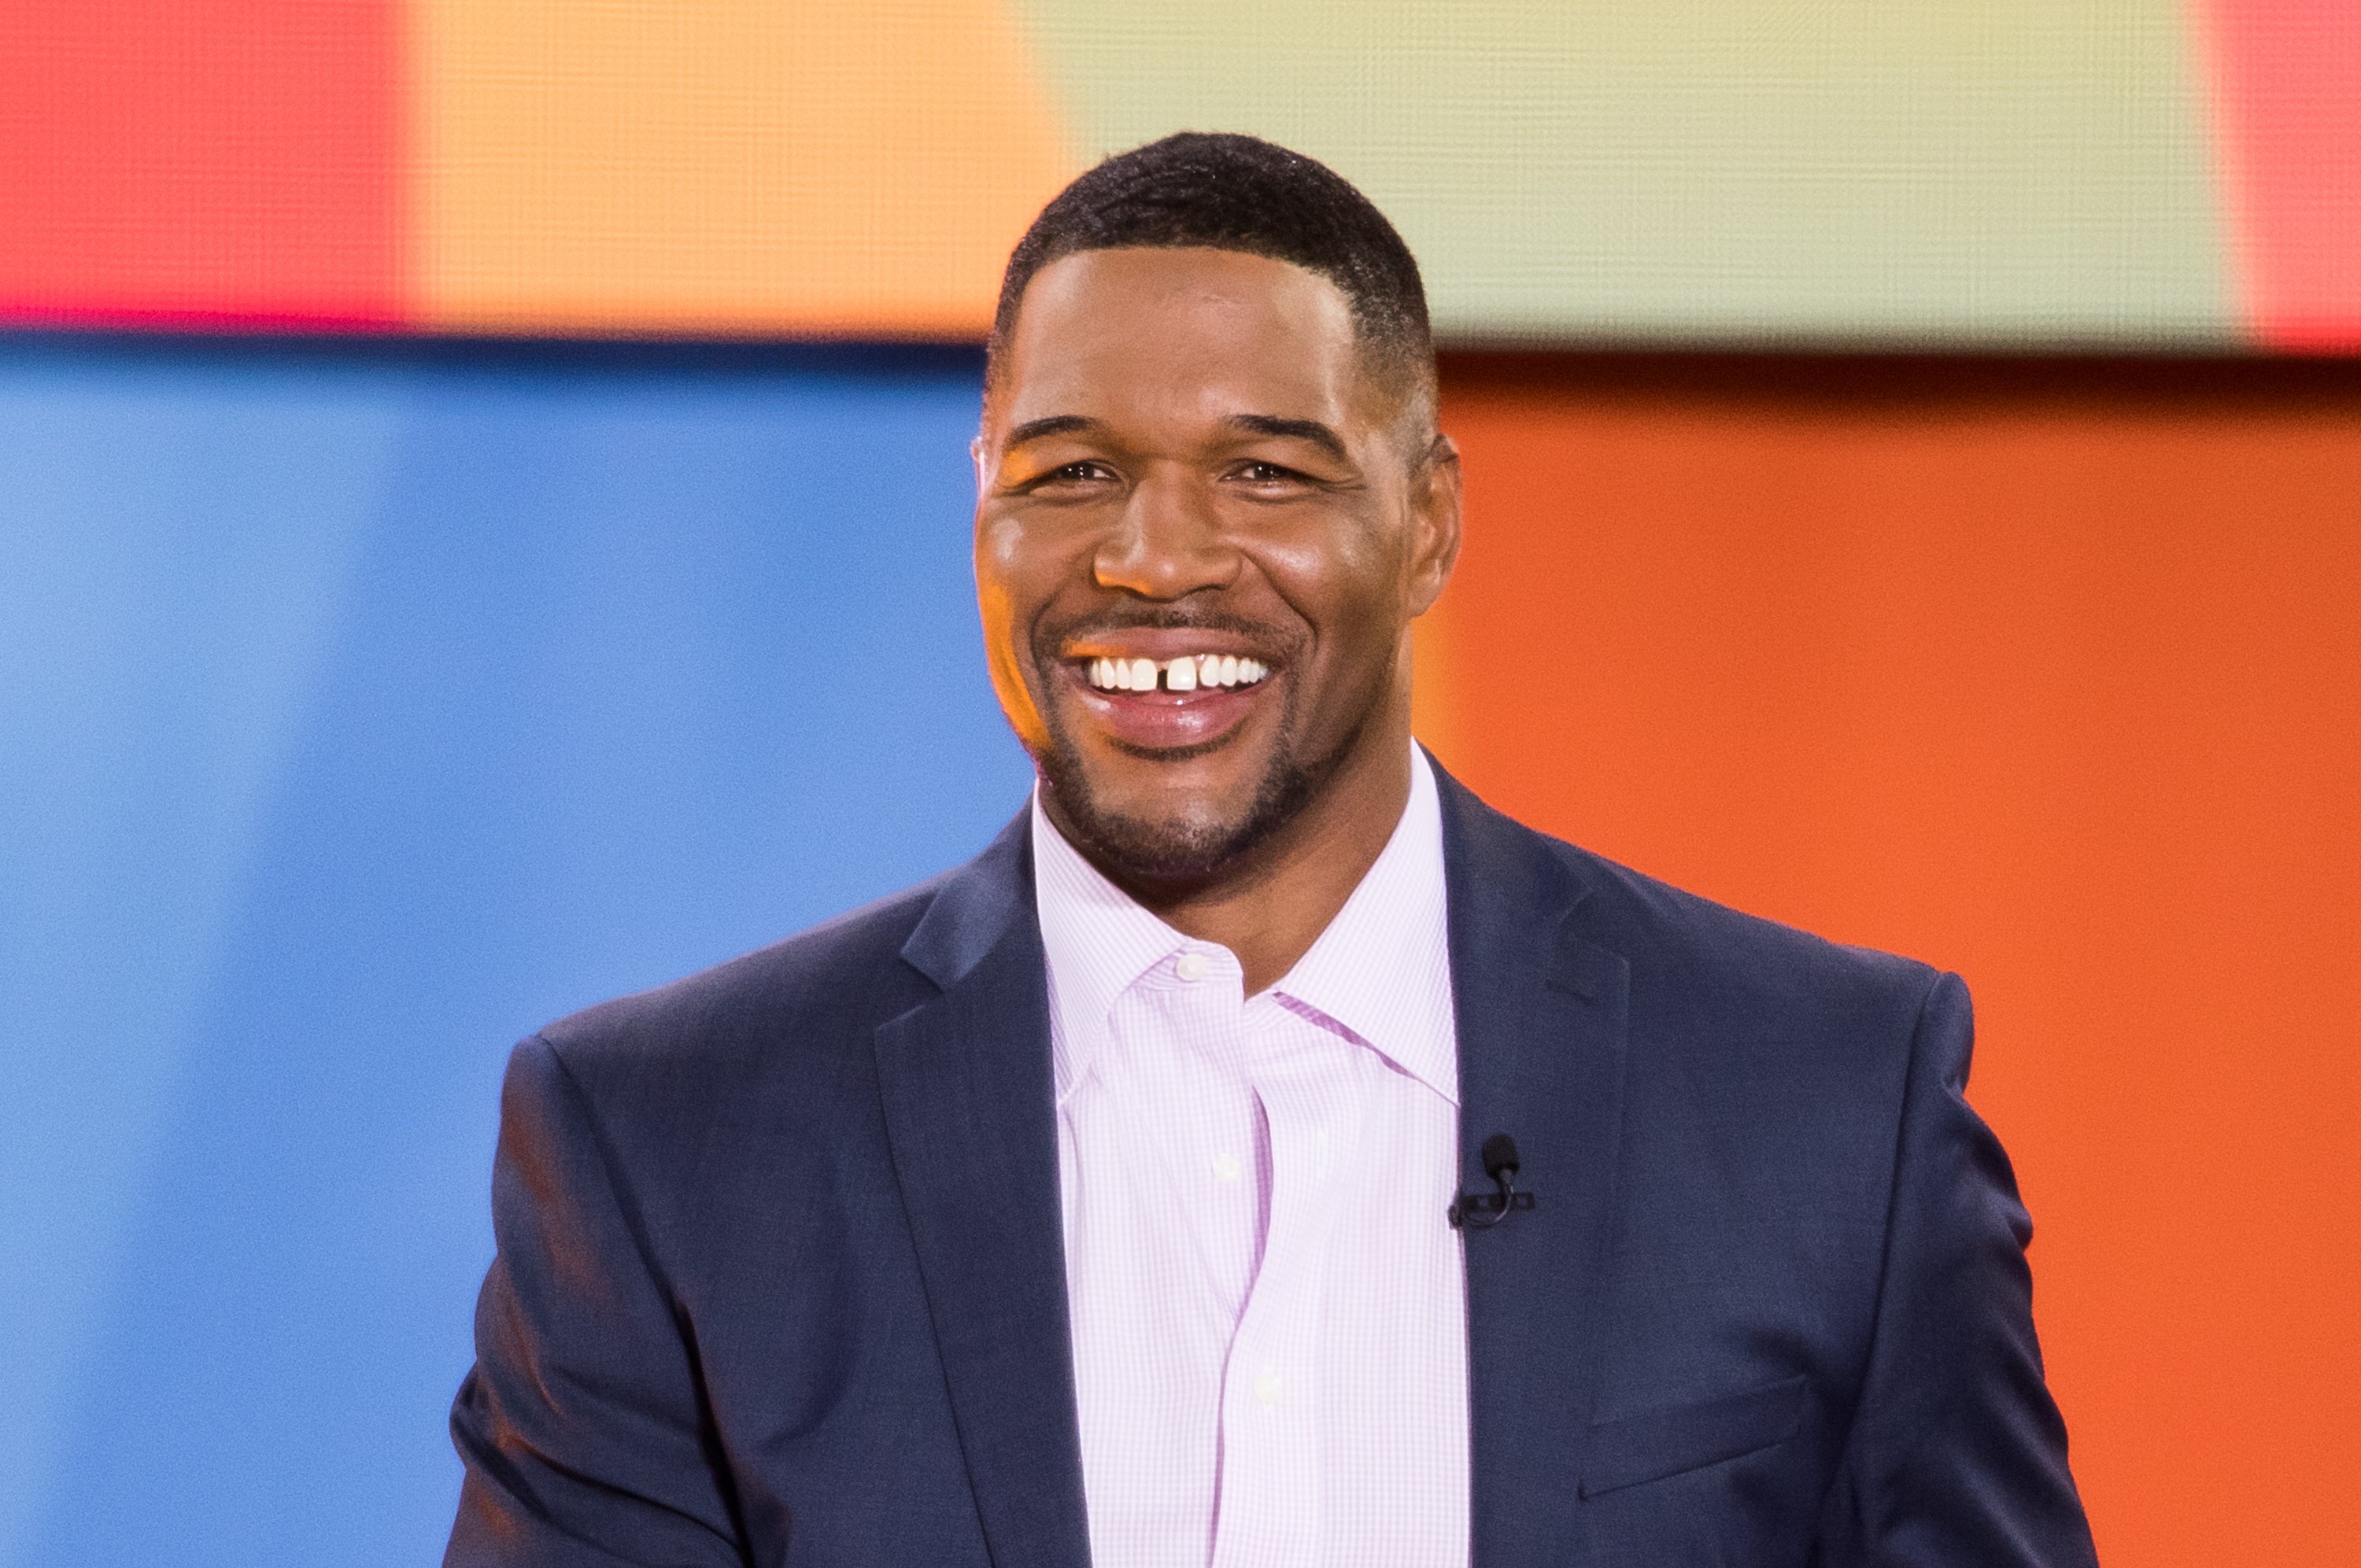 Michael Strahan on the set of ABC's "Good Morning America" on July 6, 2018 in New York City. | Source: Getty Images